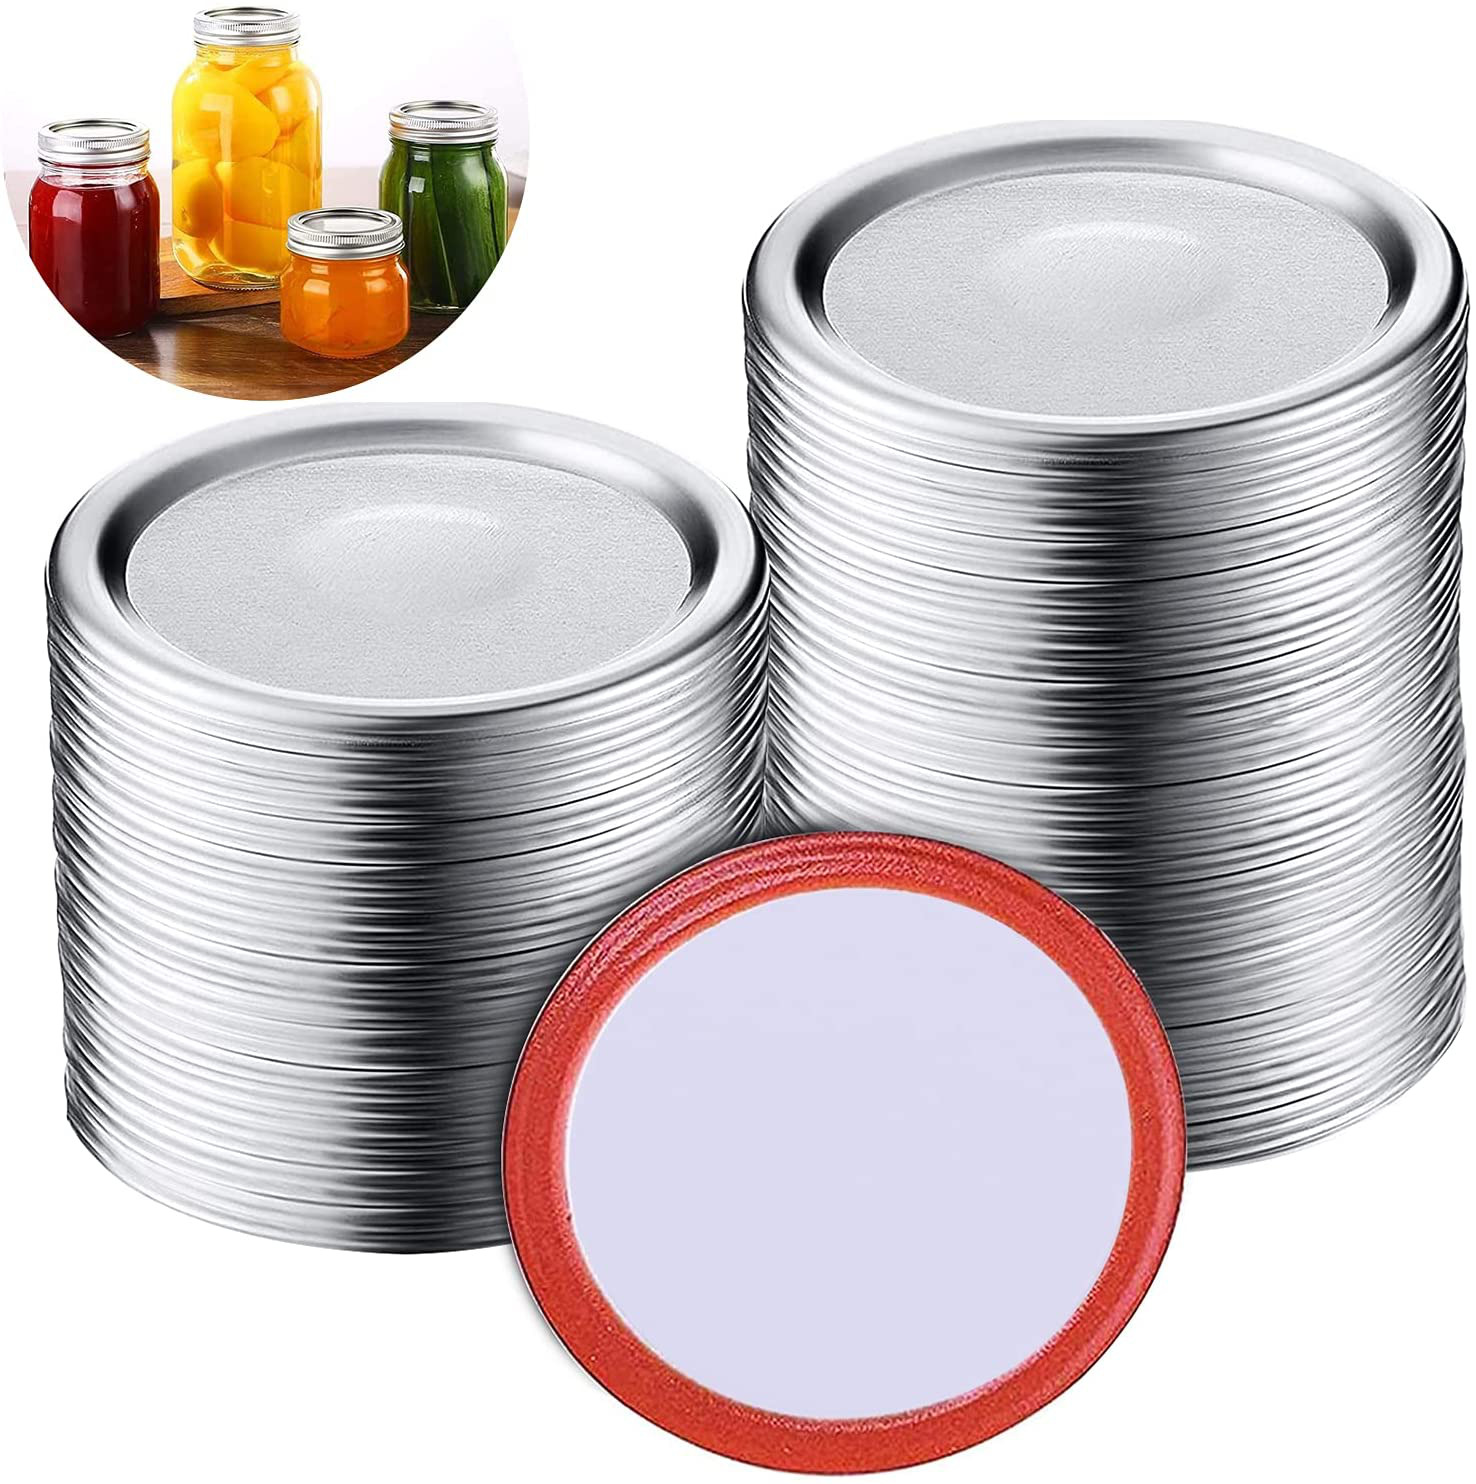 100 Count, Wide Mouth Jar Canning Lids Mason Canning Jar Lids for BALL BPA FREE